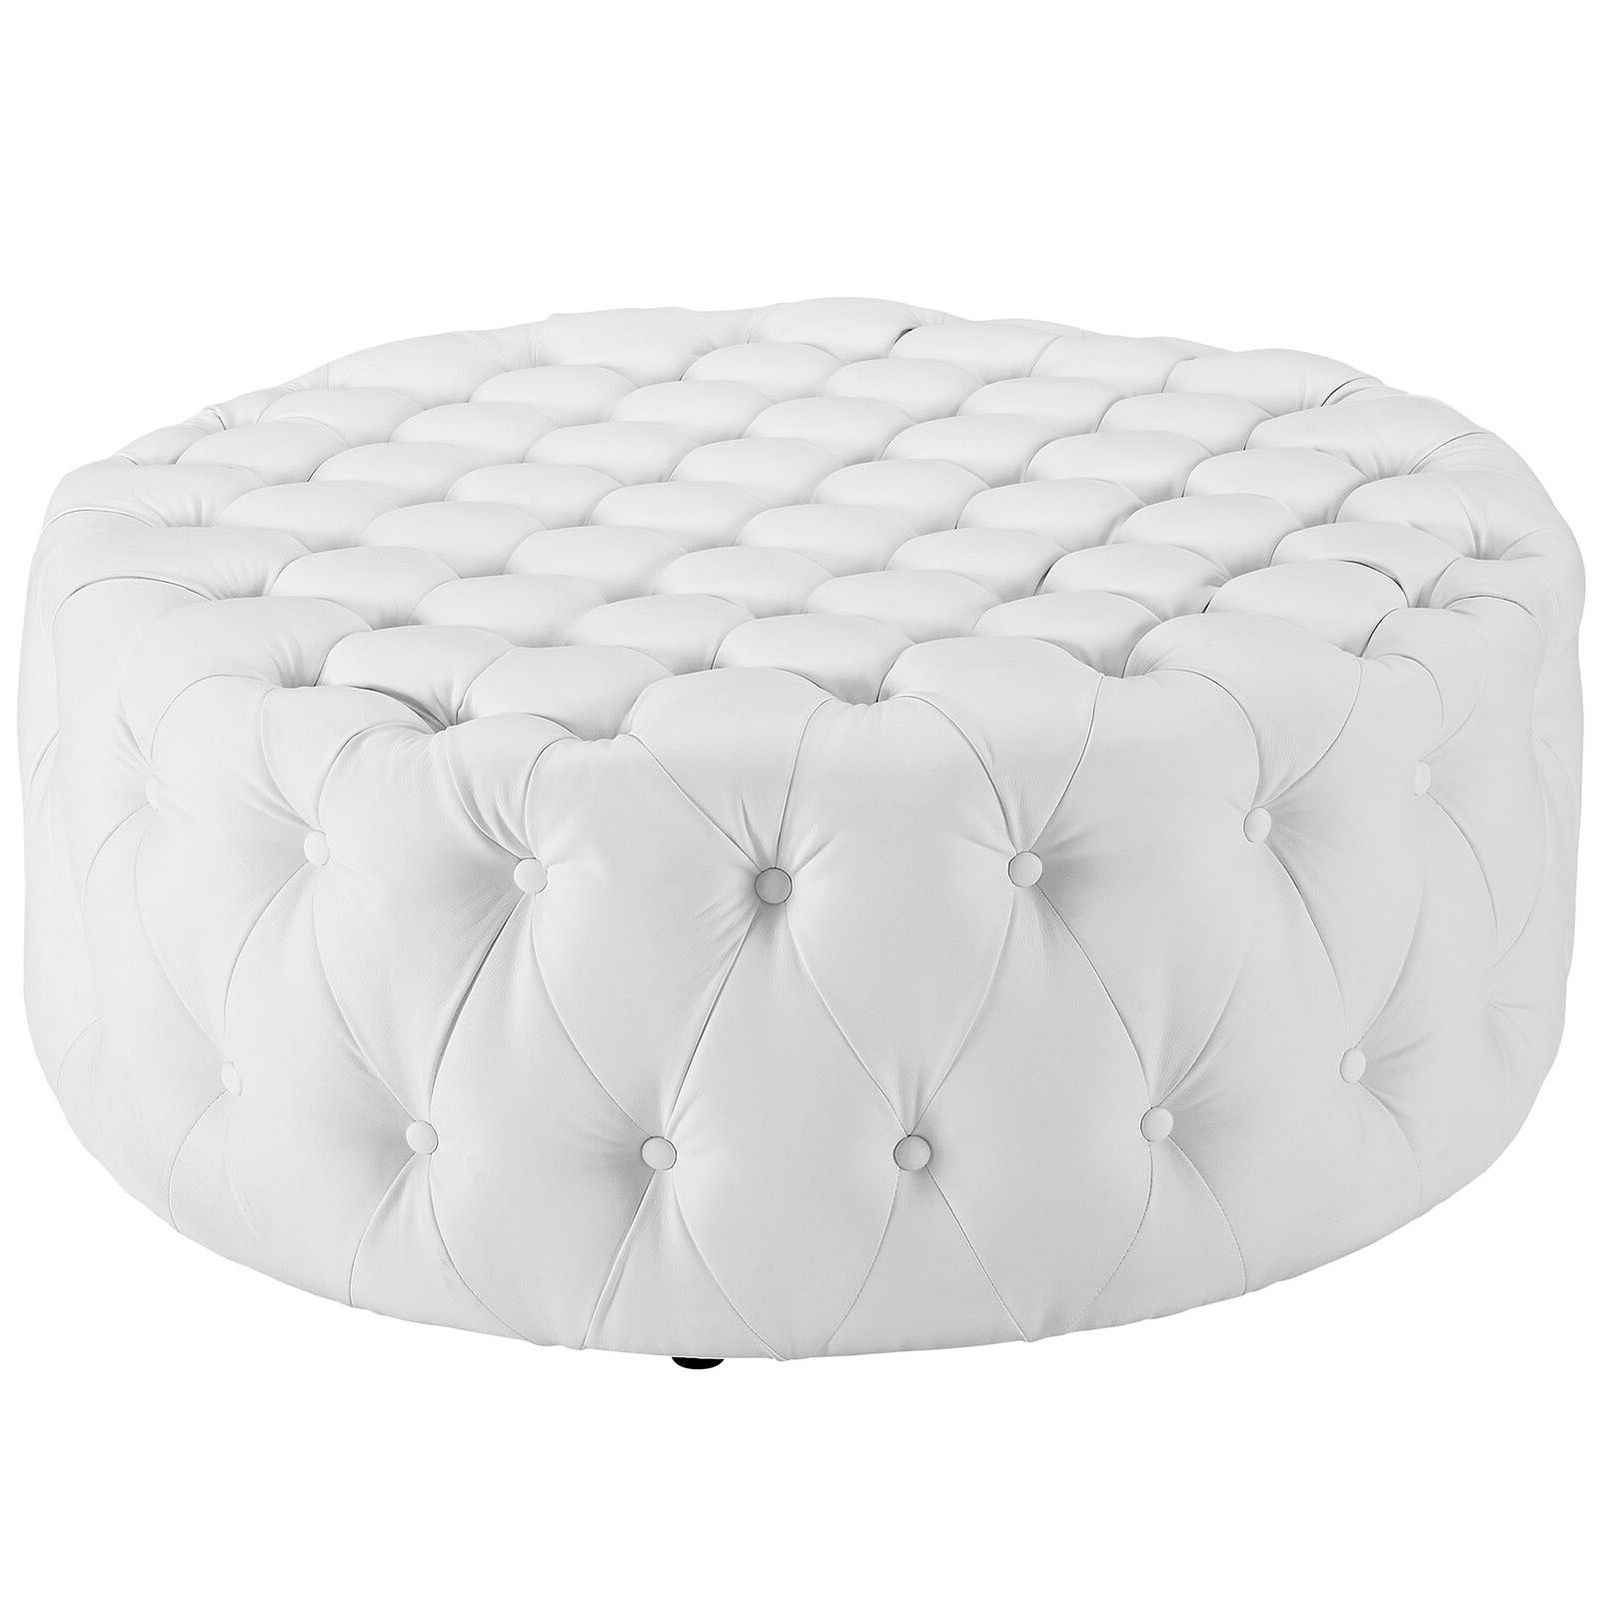 Round Blue Faux Leather Ottomans With Pull Tab In Most Current Button Tufted Faux Leather Upholstered Round Ottoman In White (View 7 of 10)